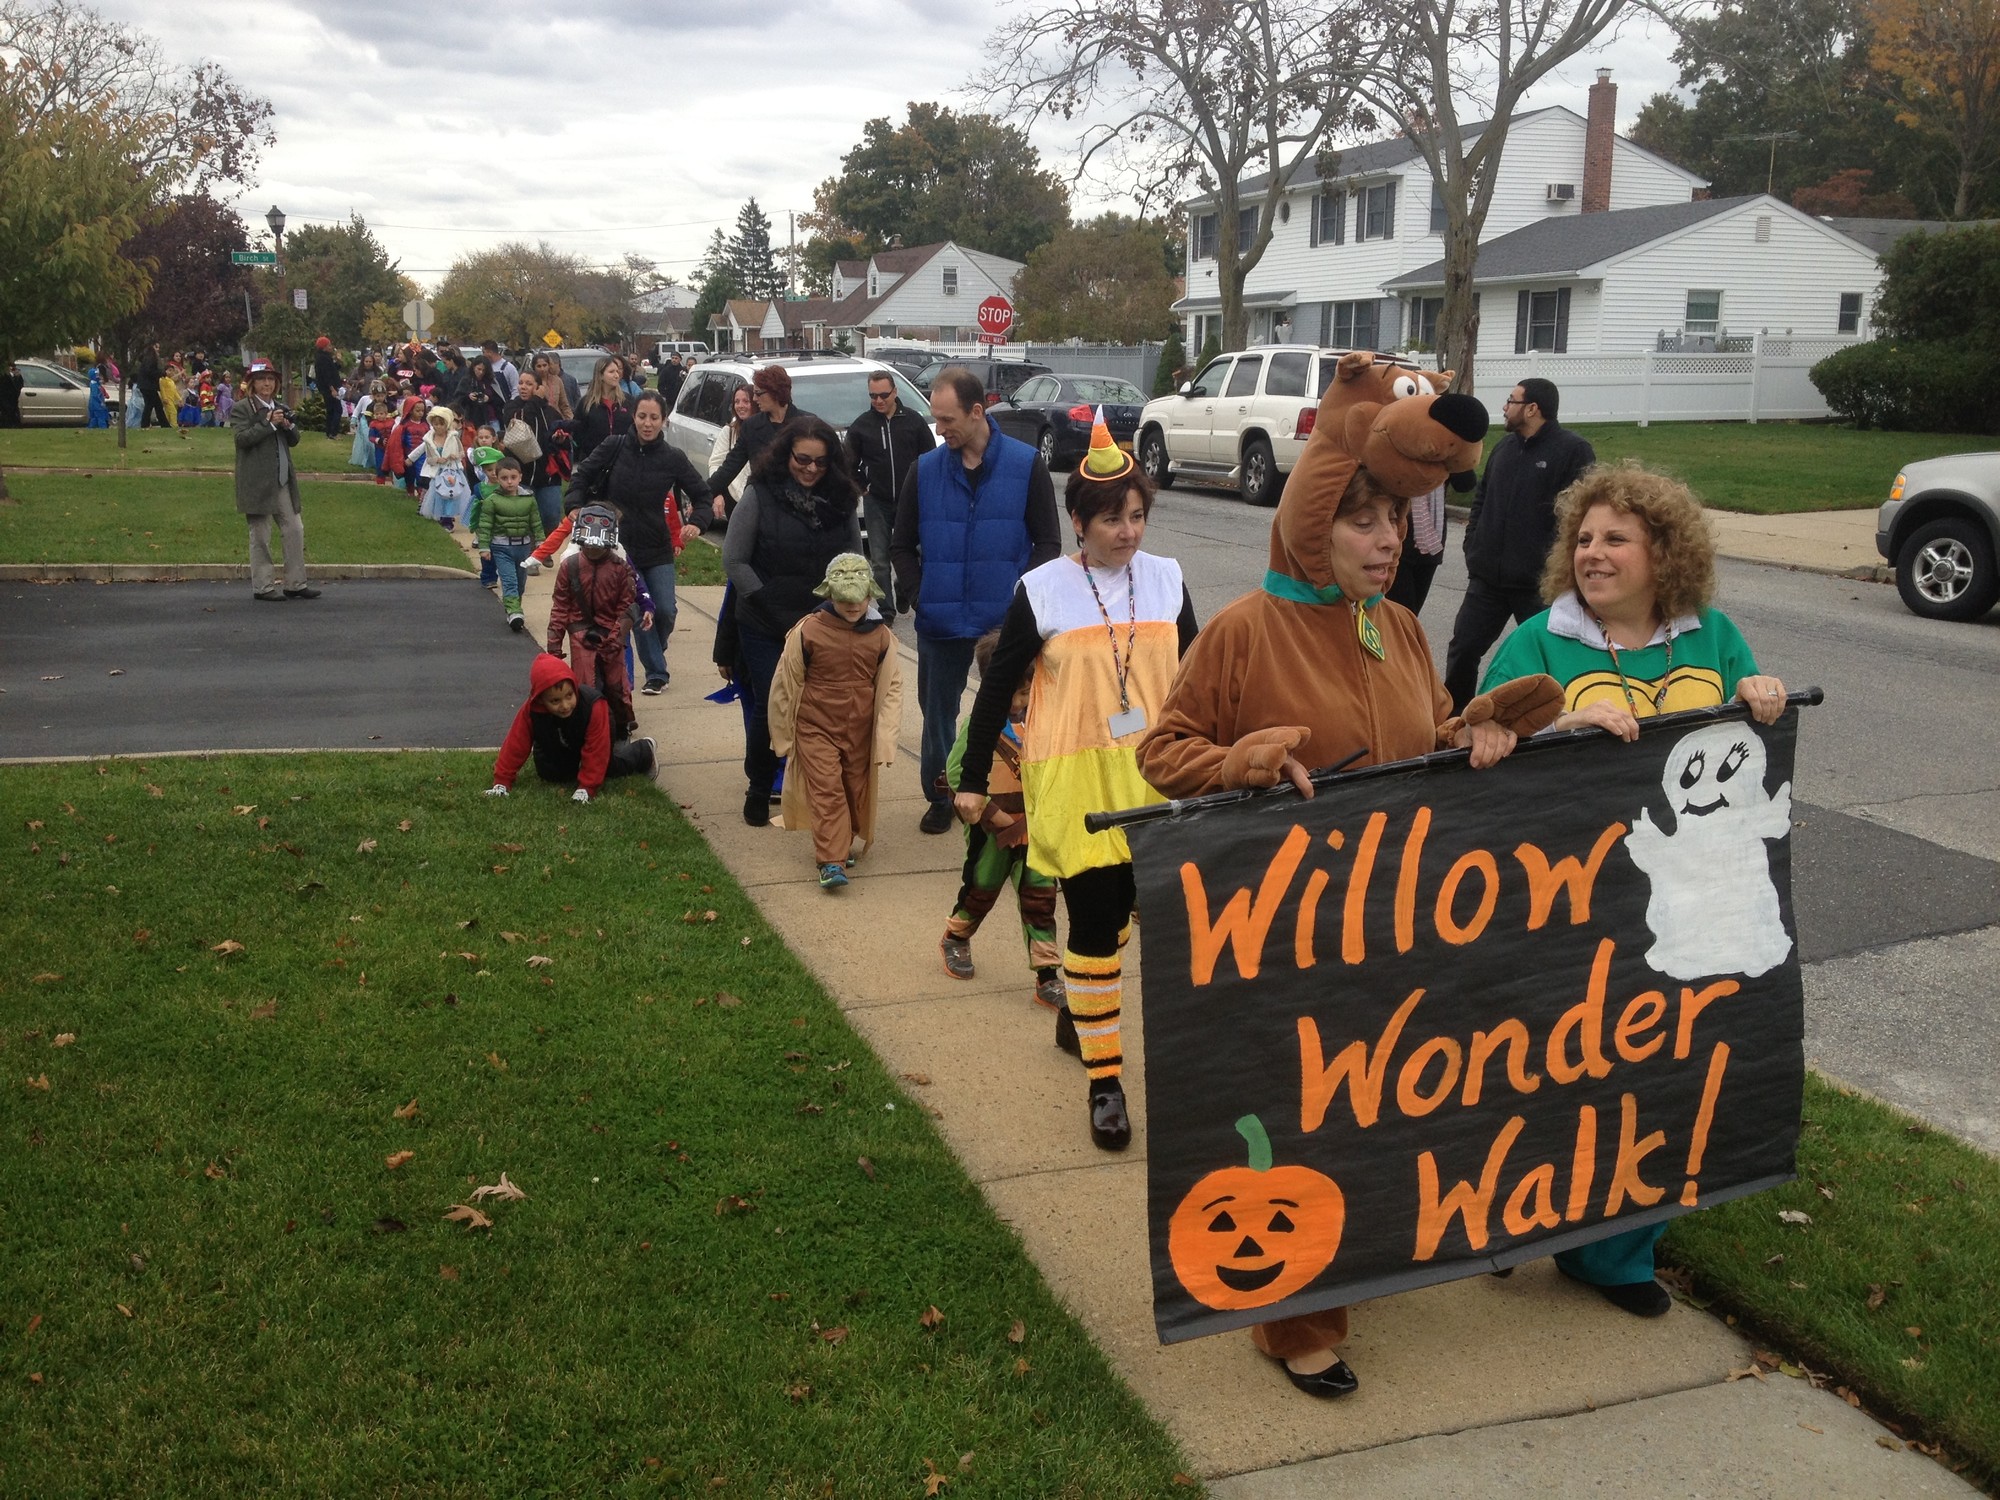 Principal Stephanie Capozzoli, as Snoopy, and kindergarten teacher Vita Tringone, right, lead the Willow Wonder Walk, which benefits the March of Dimes organization.